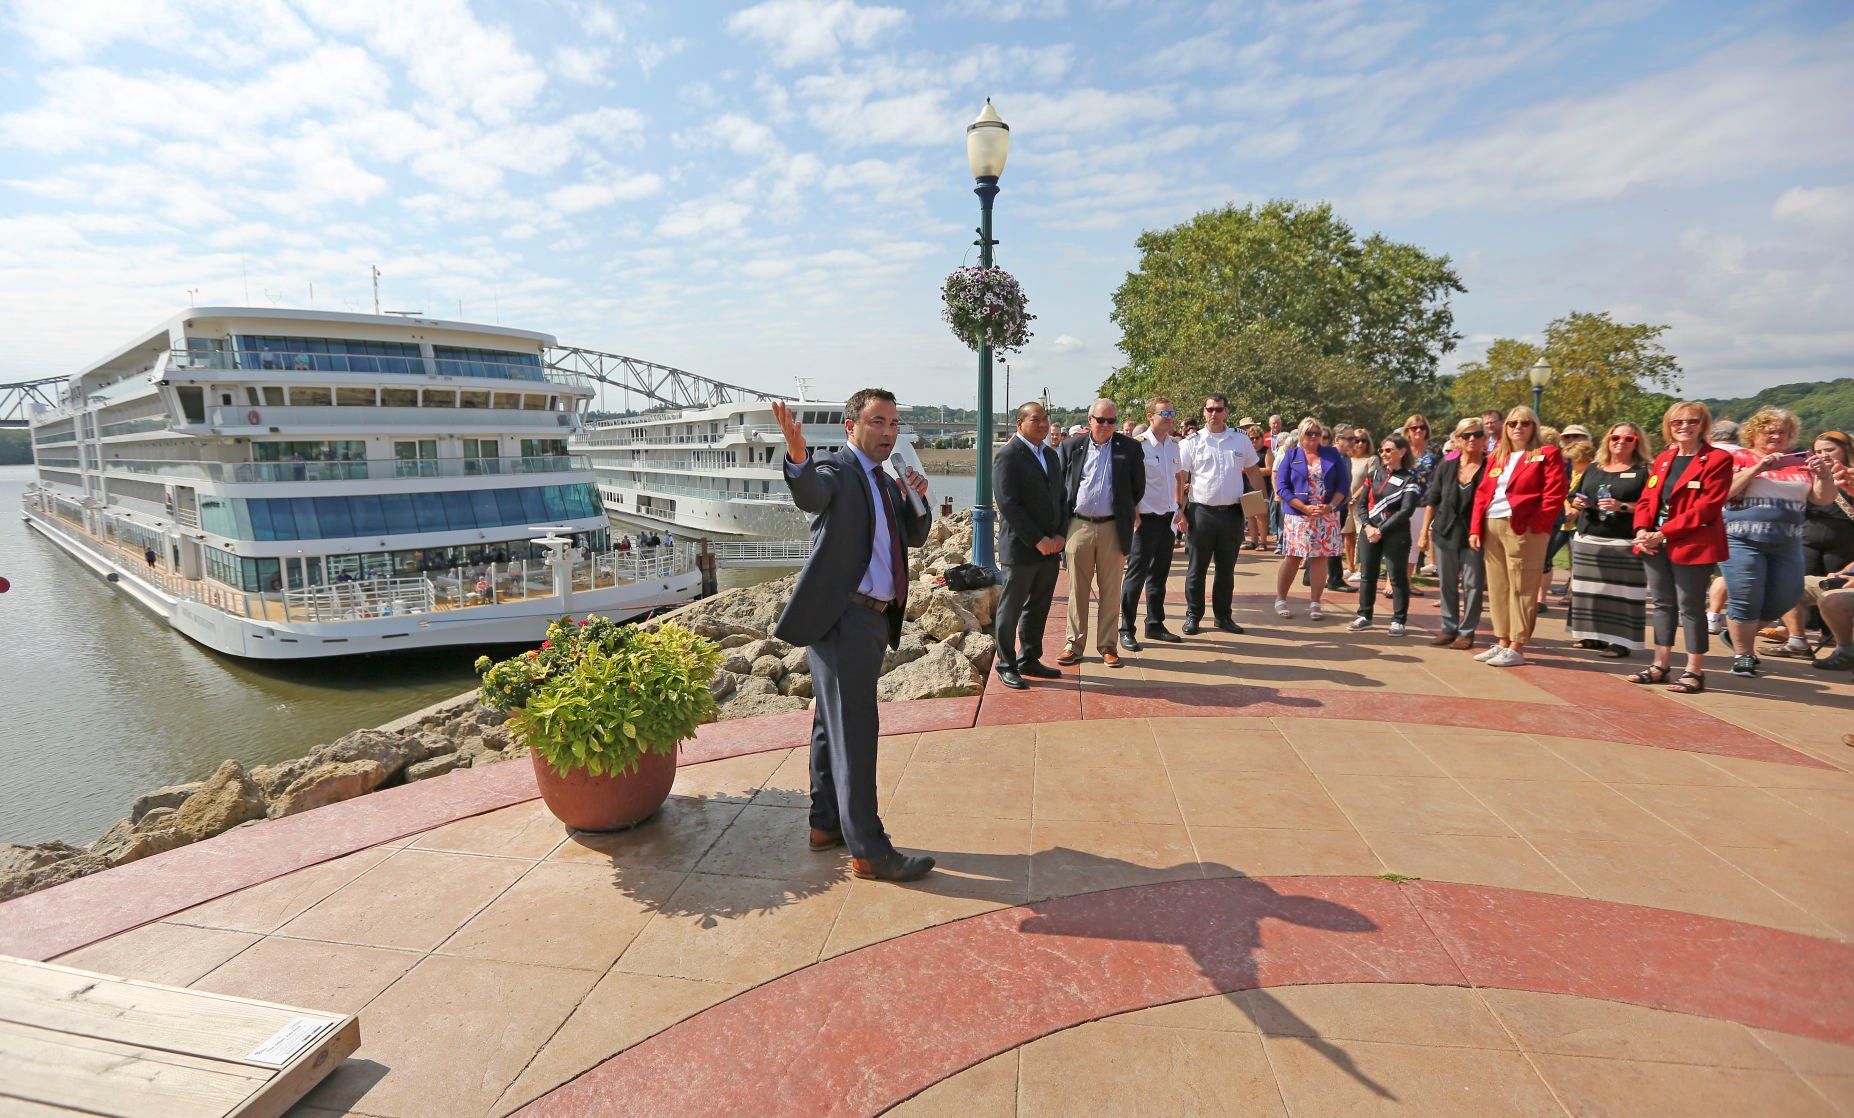 Dubuque Mayor Brad Cavanagh speaks during a ribbon-cutting ceremony for the Viking Mississippi.    PHOTO CREDIT: Dave Kettering